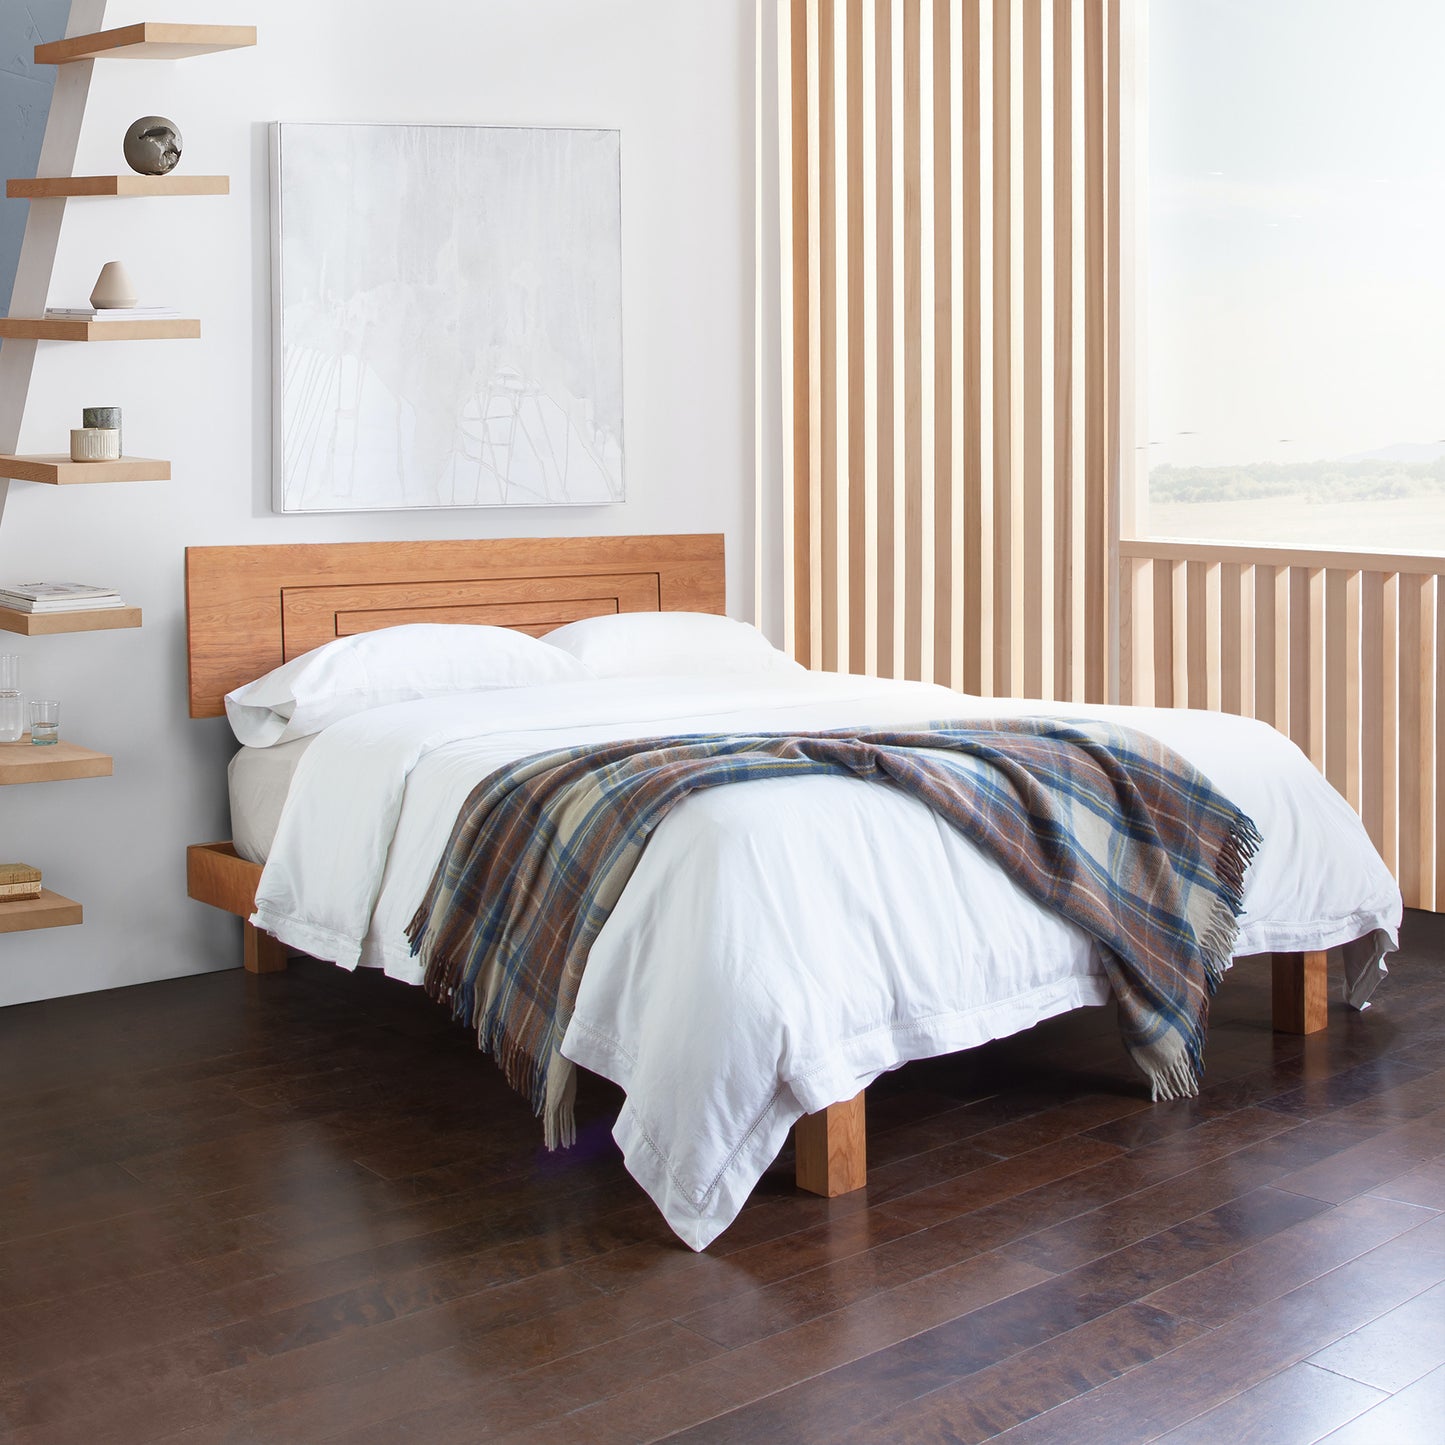 A bed in a bedroom with wooden floors.